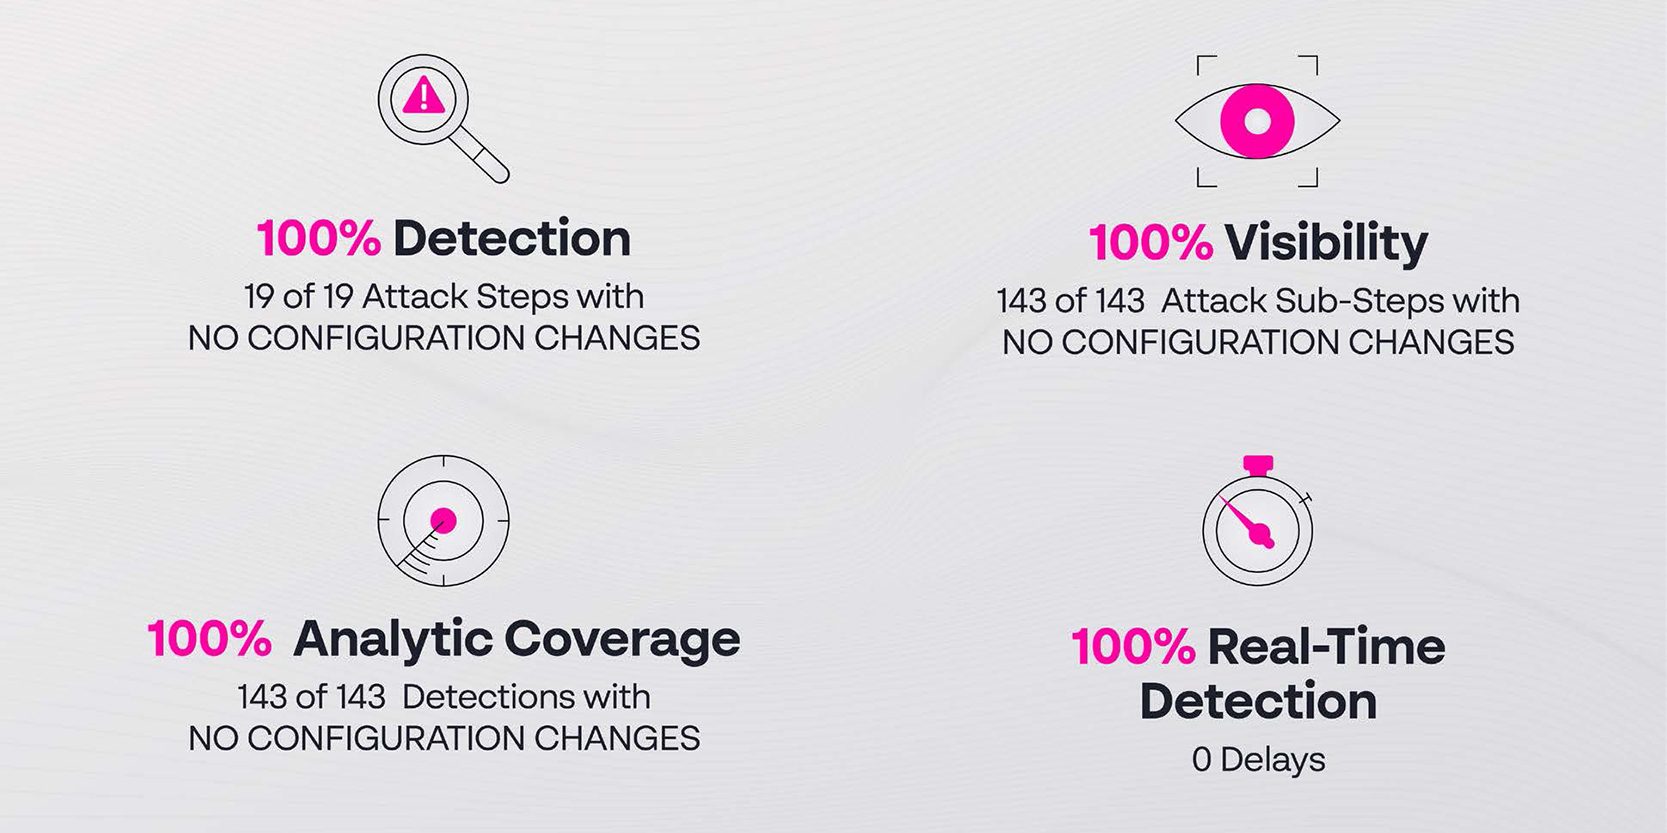 Cynet achieved 100% Detection, Visibility, Analytic Coverage and Real-Time Detection